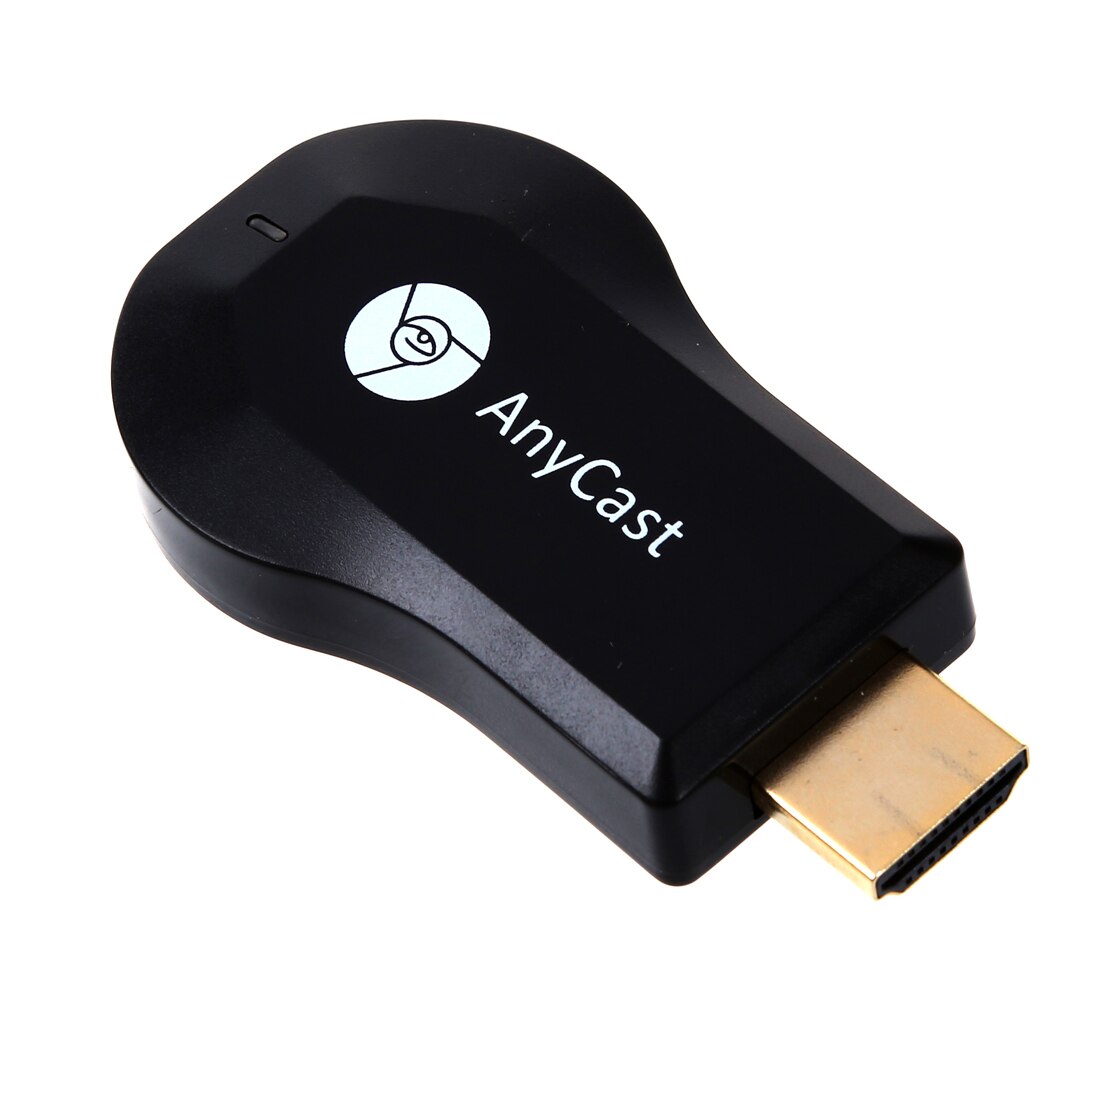 Full-Anycast M2 Plus Mini Wifi Display Dongle Ontvanger 1080P Airmirror Dlna Airplay Miracast Delen Hdmi-poort voor Hdtv